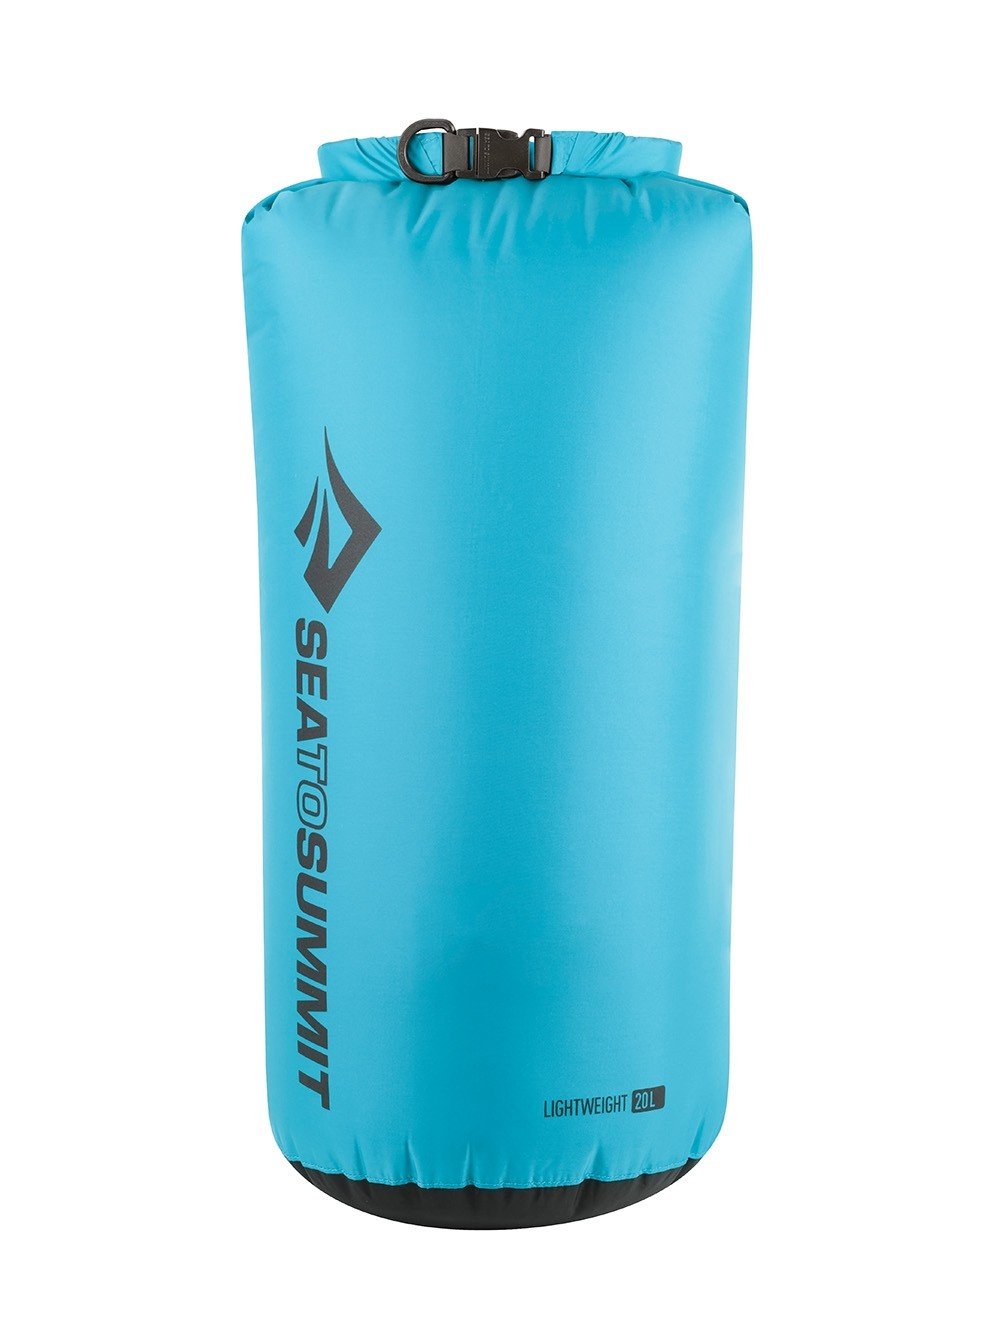 Sea To Summit Lightweight 70D 20 Litres Dry Sack Bags, Packs and Cases Sea To Summit Blue Tactical Gear Supplier Tactical Distributors Australia